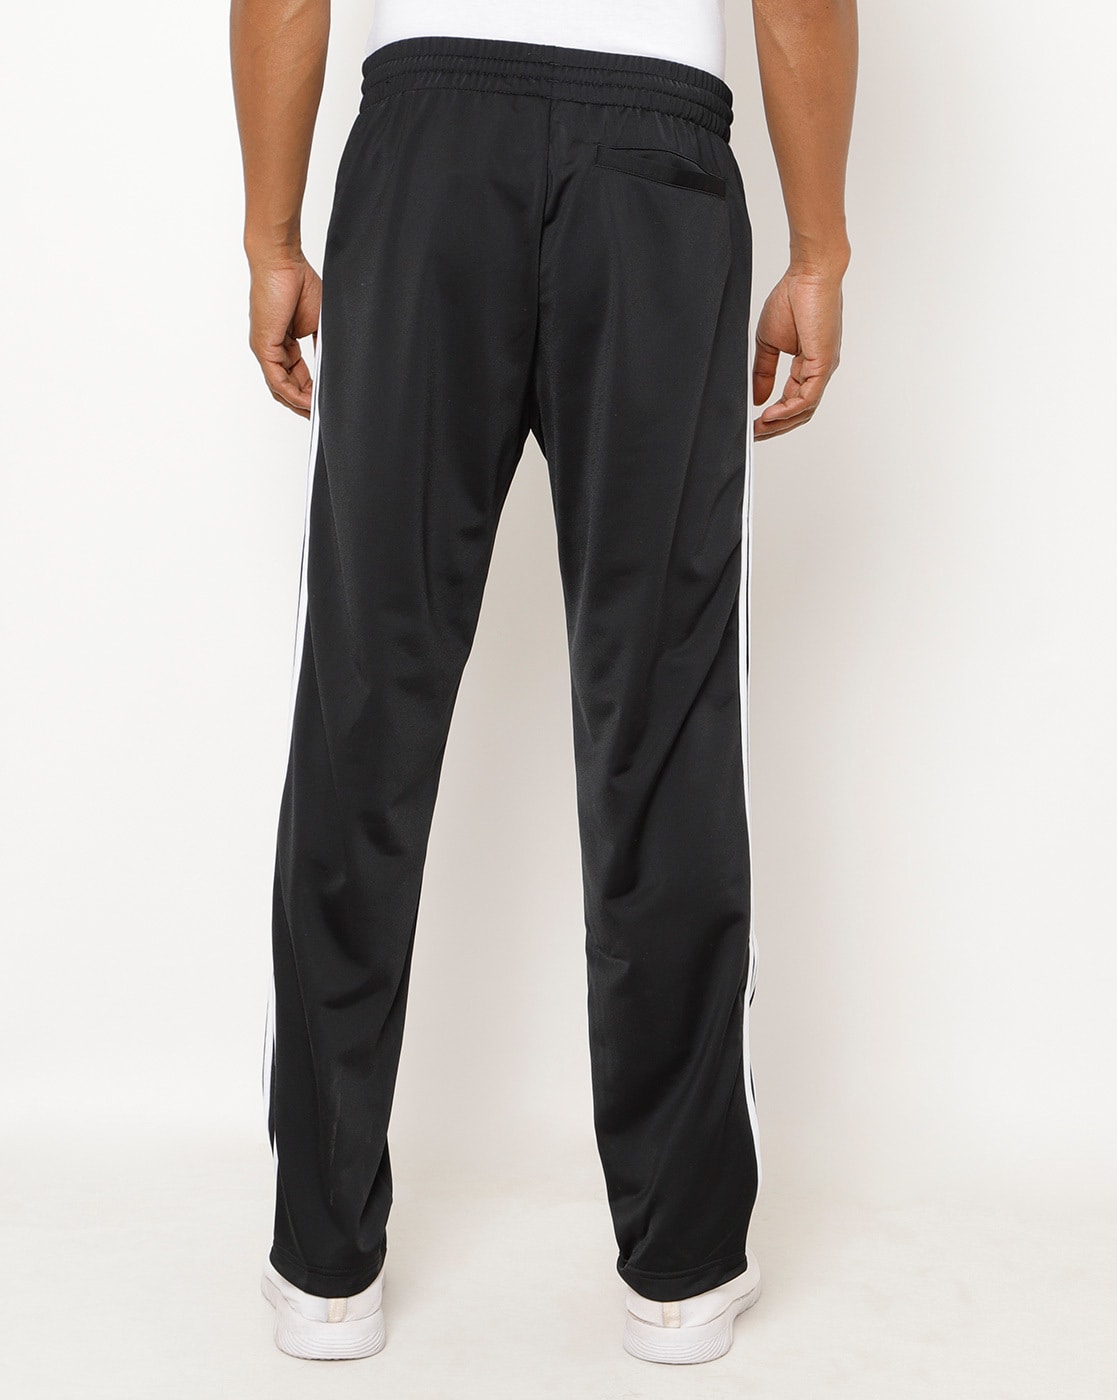 ADIDAS TRACKPANTS at Rs 425/piece